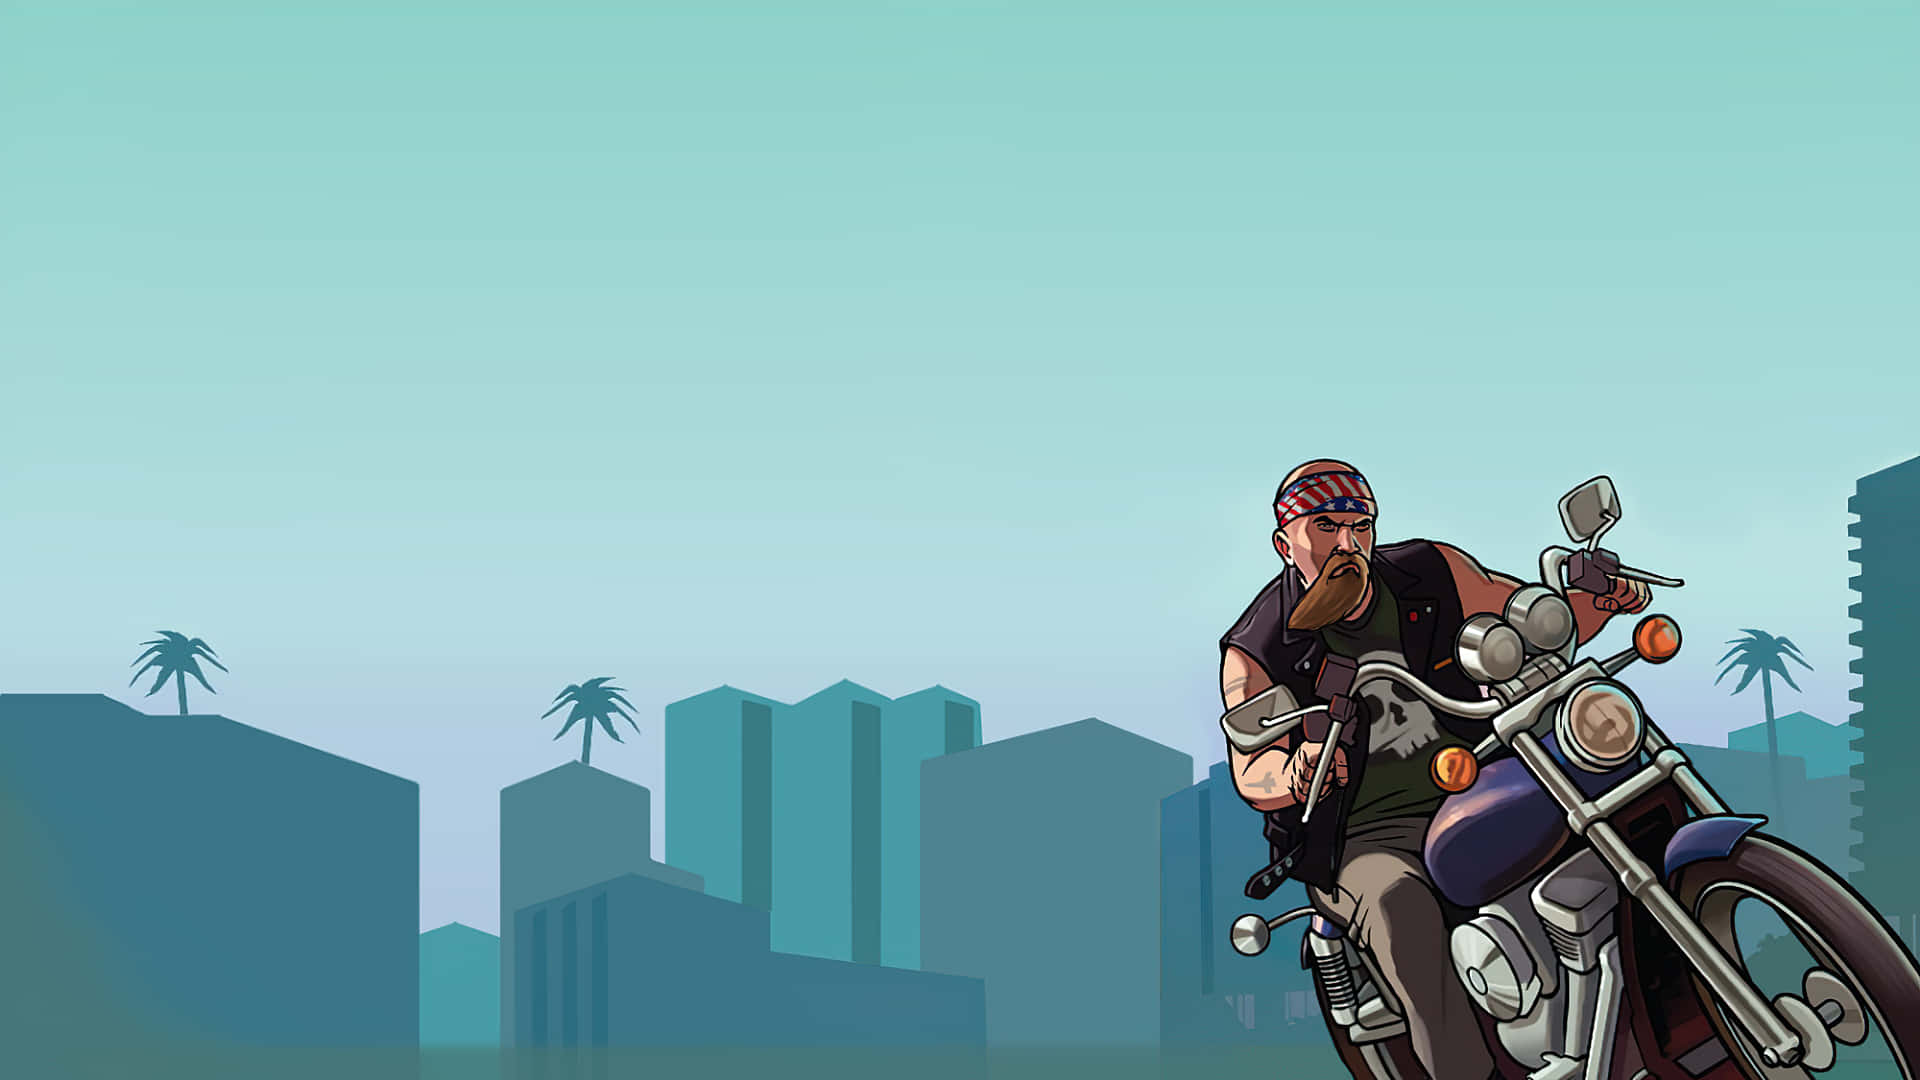 A Man Riding A Motorcycle In The City Wallpaper